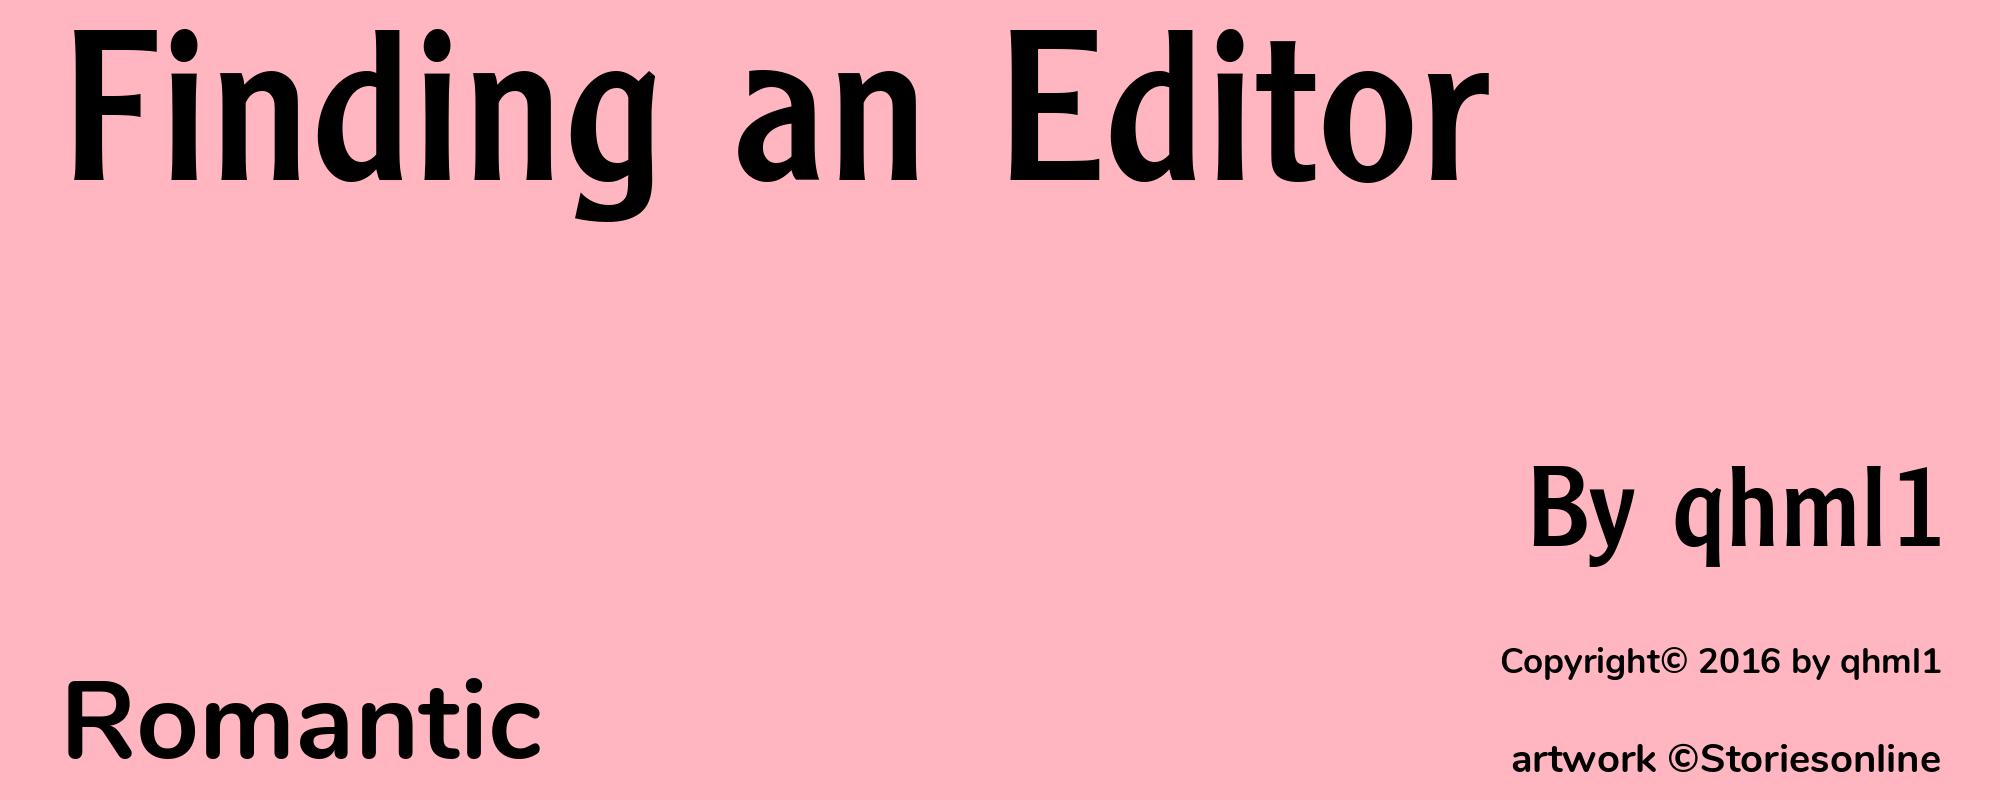 Finding an Editor - Cover